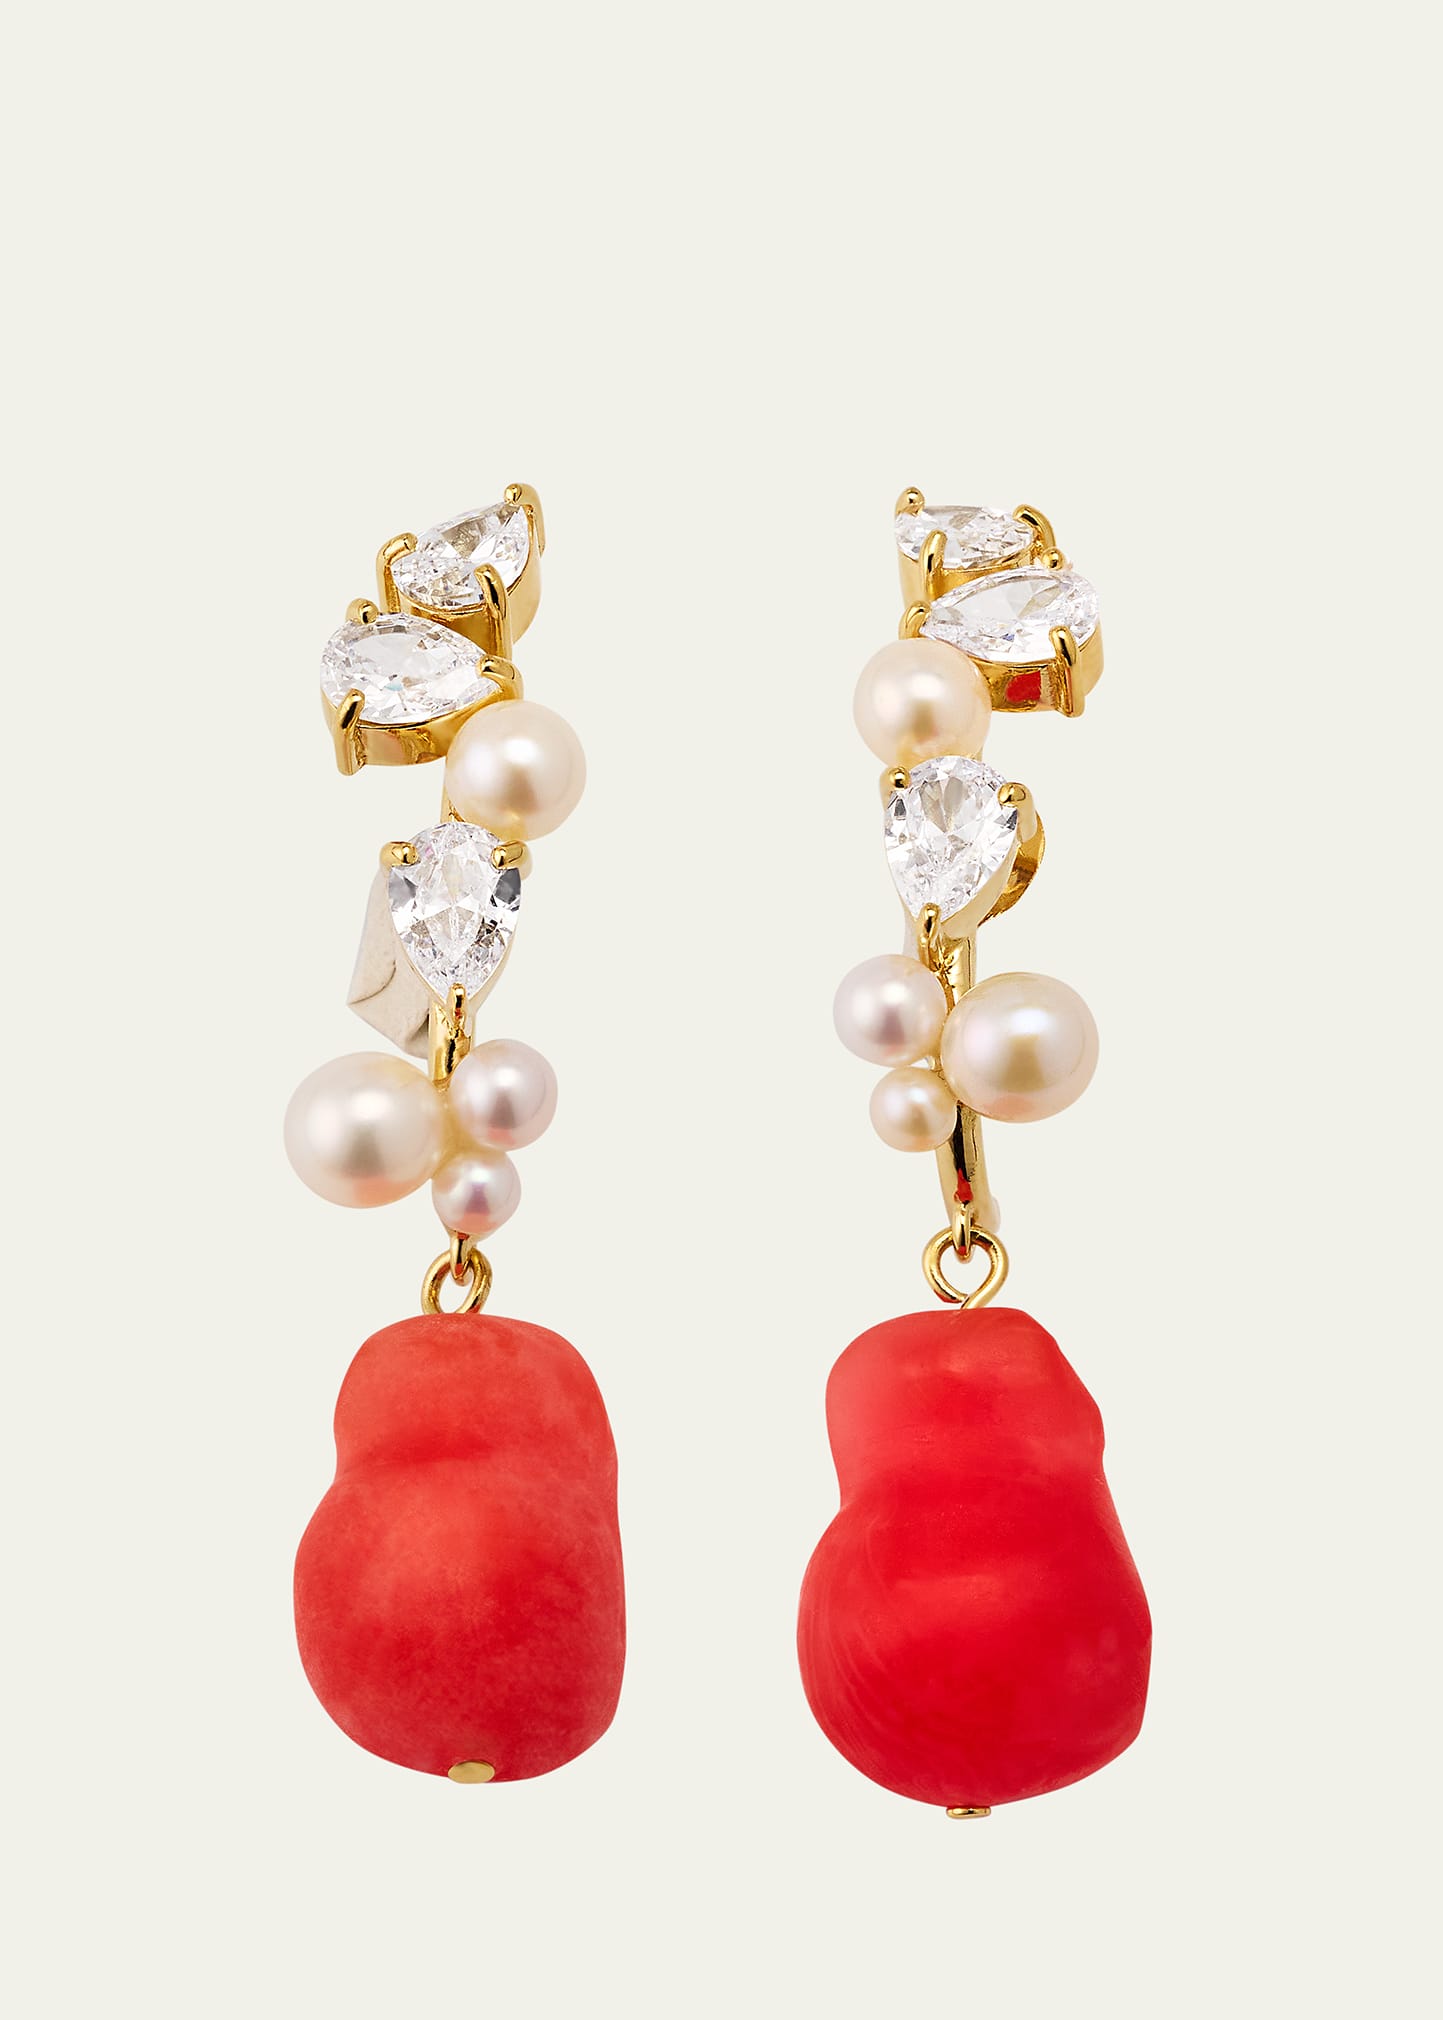 Pearl, Eze-Eh-Coral, And Crystal Climbing Drop Earrings With Recycled Sterling Silver